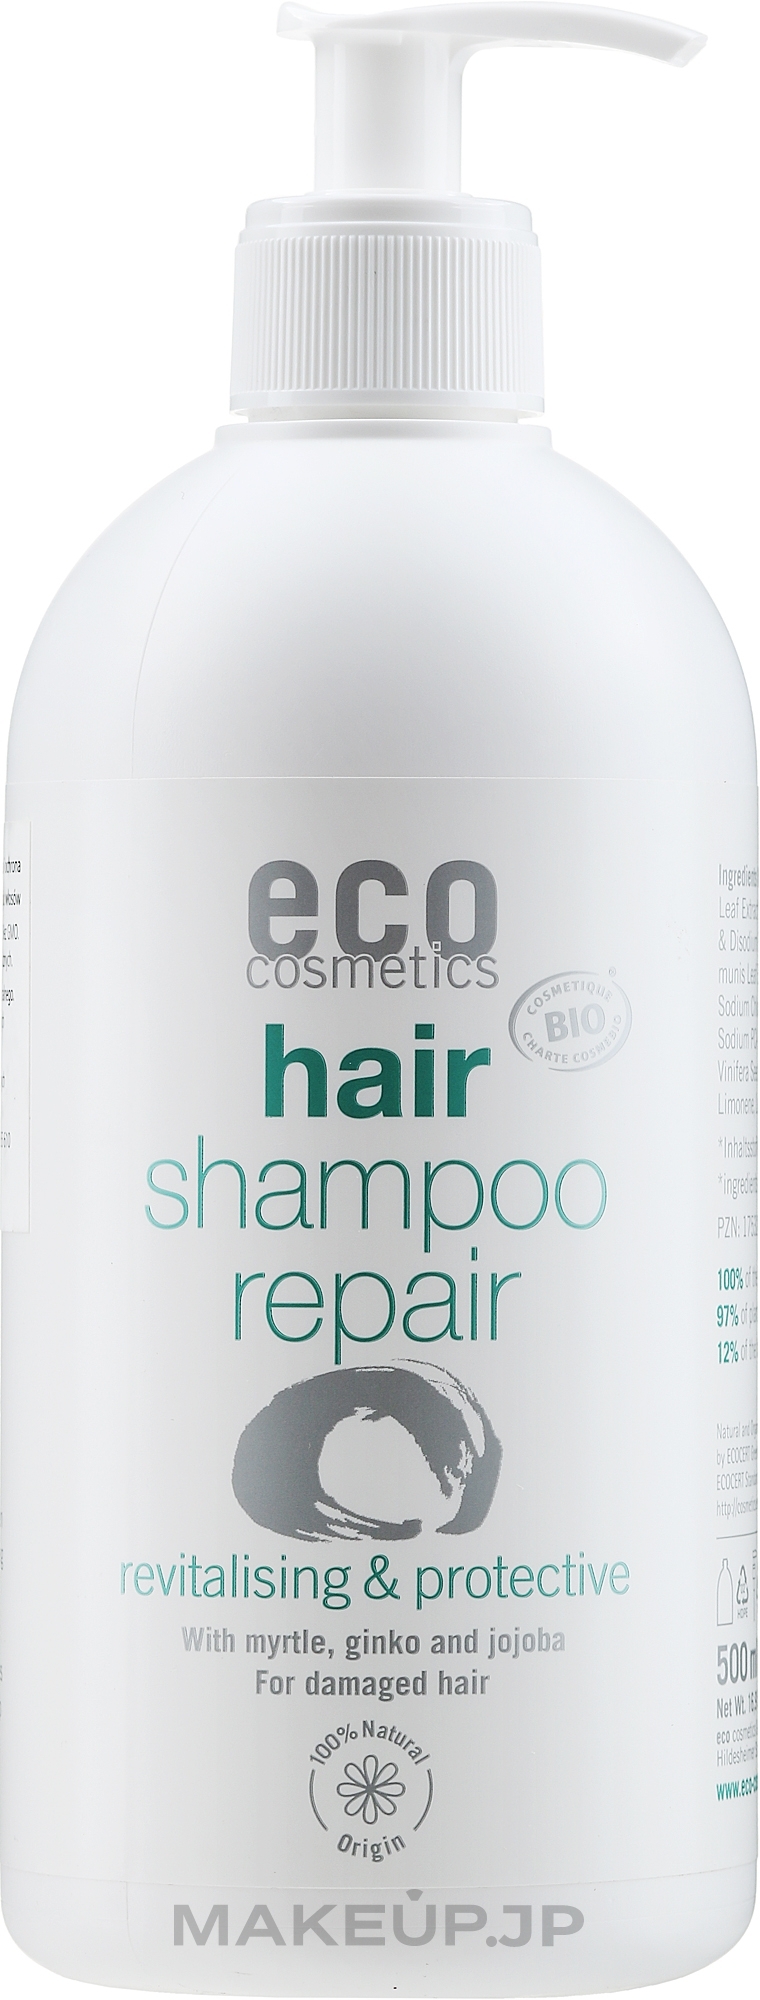 Revitalizing Shampoo with Myrtle, Ginkgo Biloba, and Jojoba Extracts, with dispenser - Eco Cosmetics Hair Shampoo Repair Revitalising & Protective — photo 500 ml